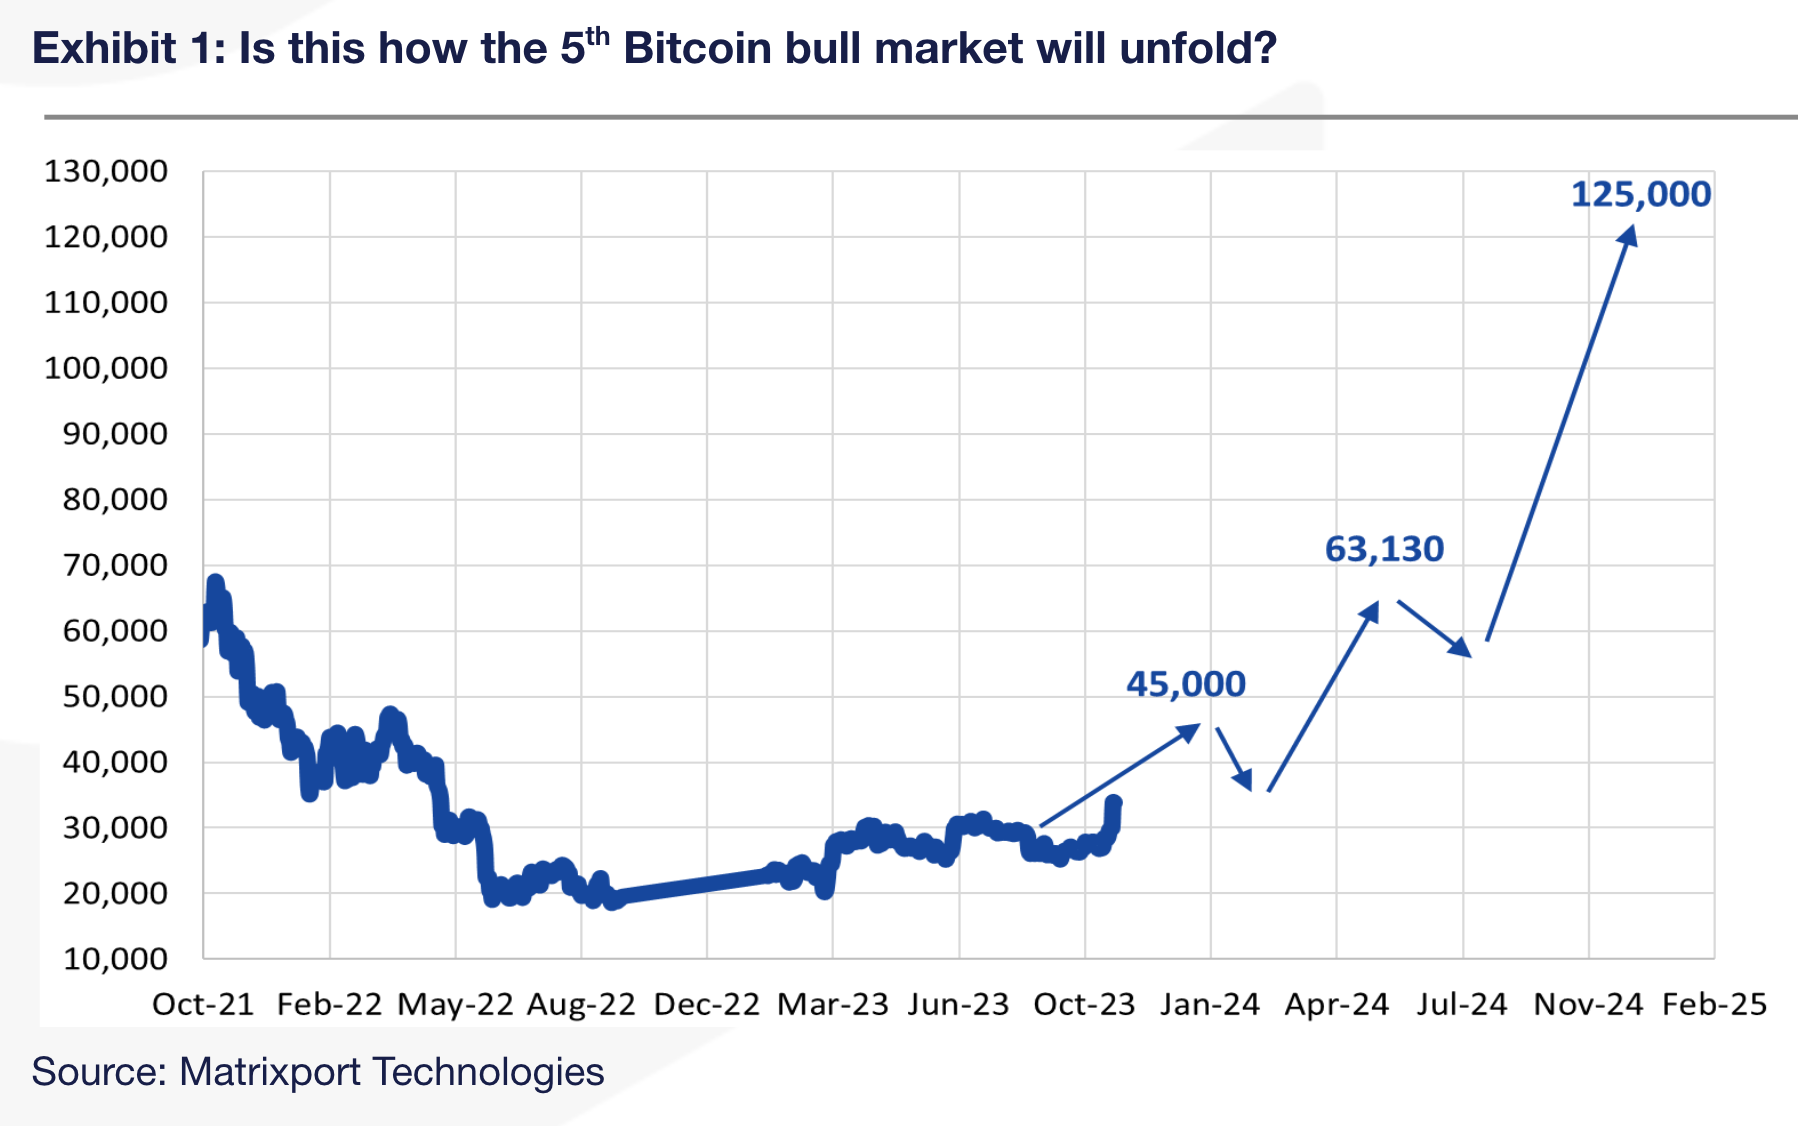 As 5th Bitcoin (BTC) Bull Market Is Confirmed, Top Trading Platform Sets Timeline for $125,000